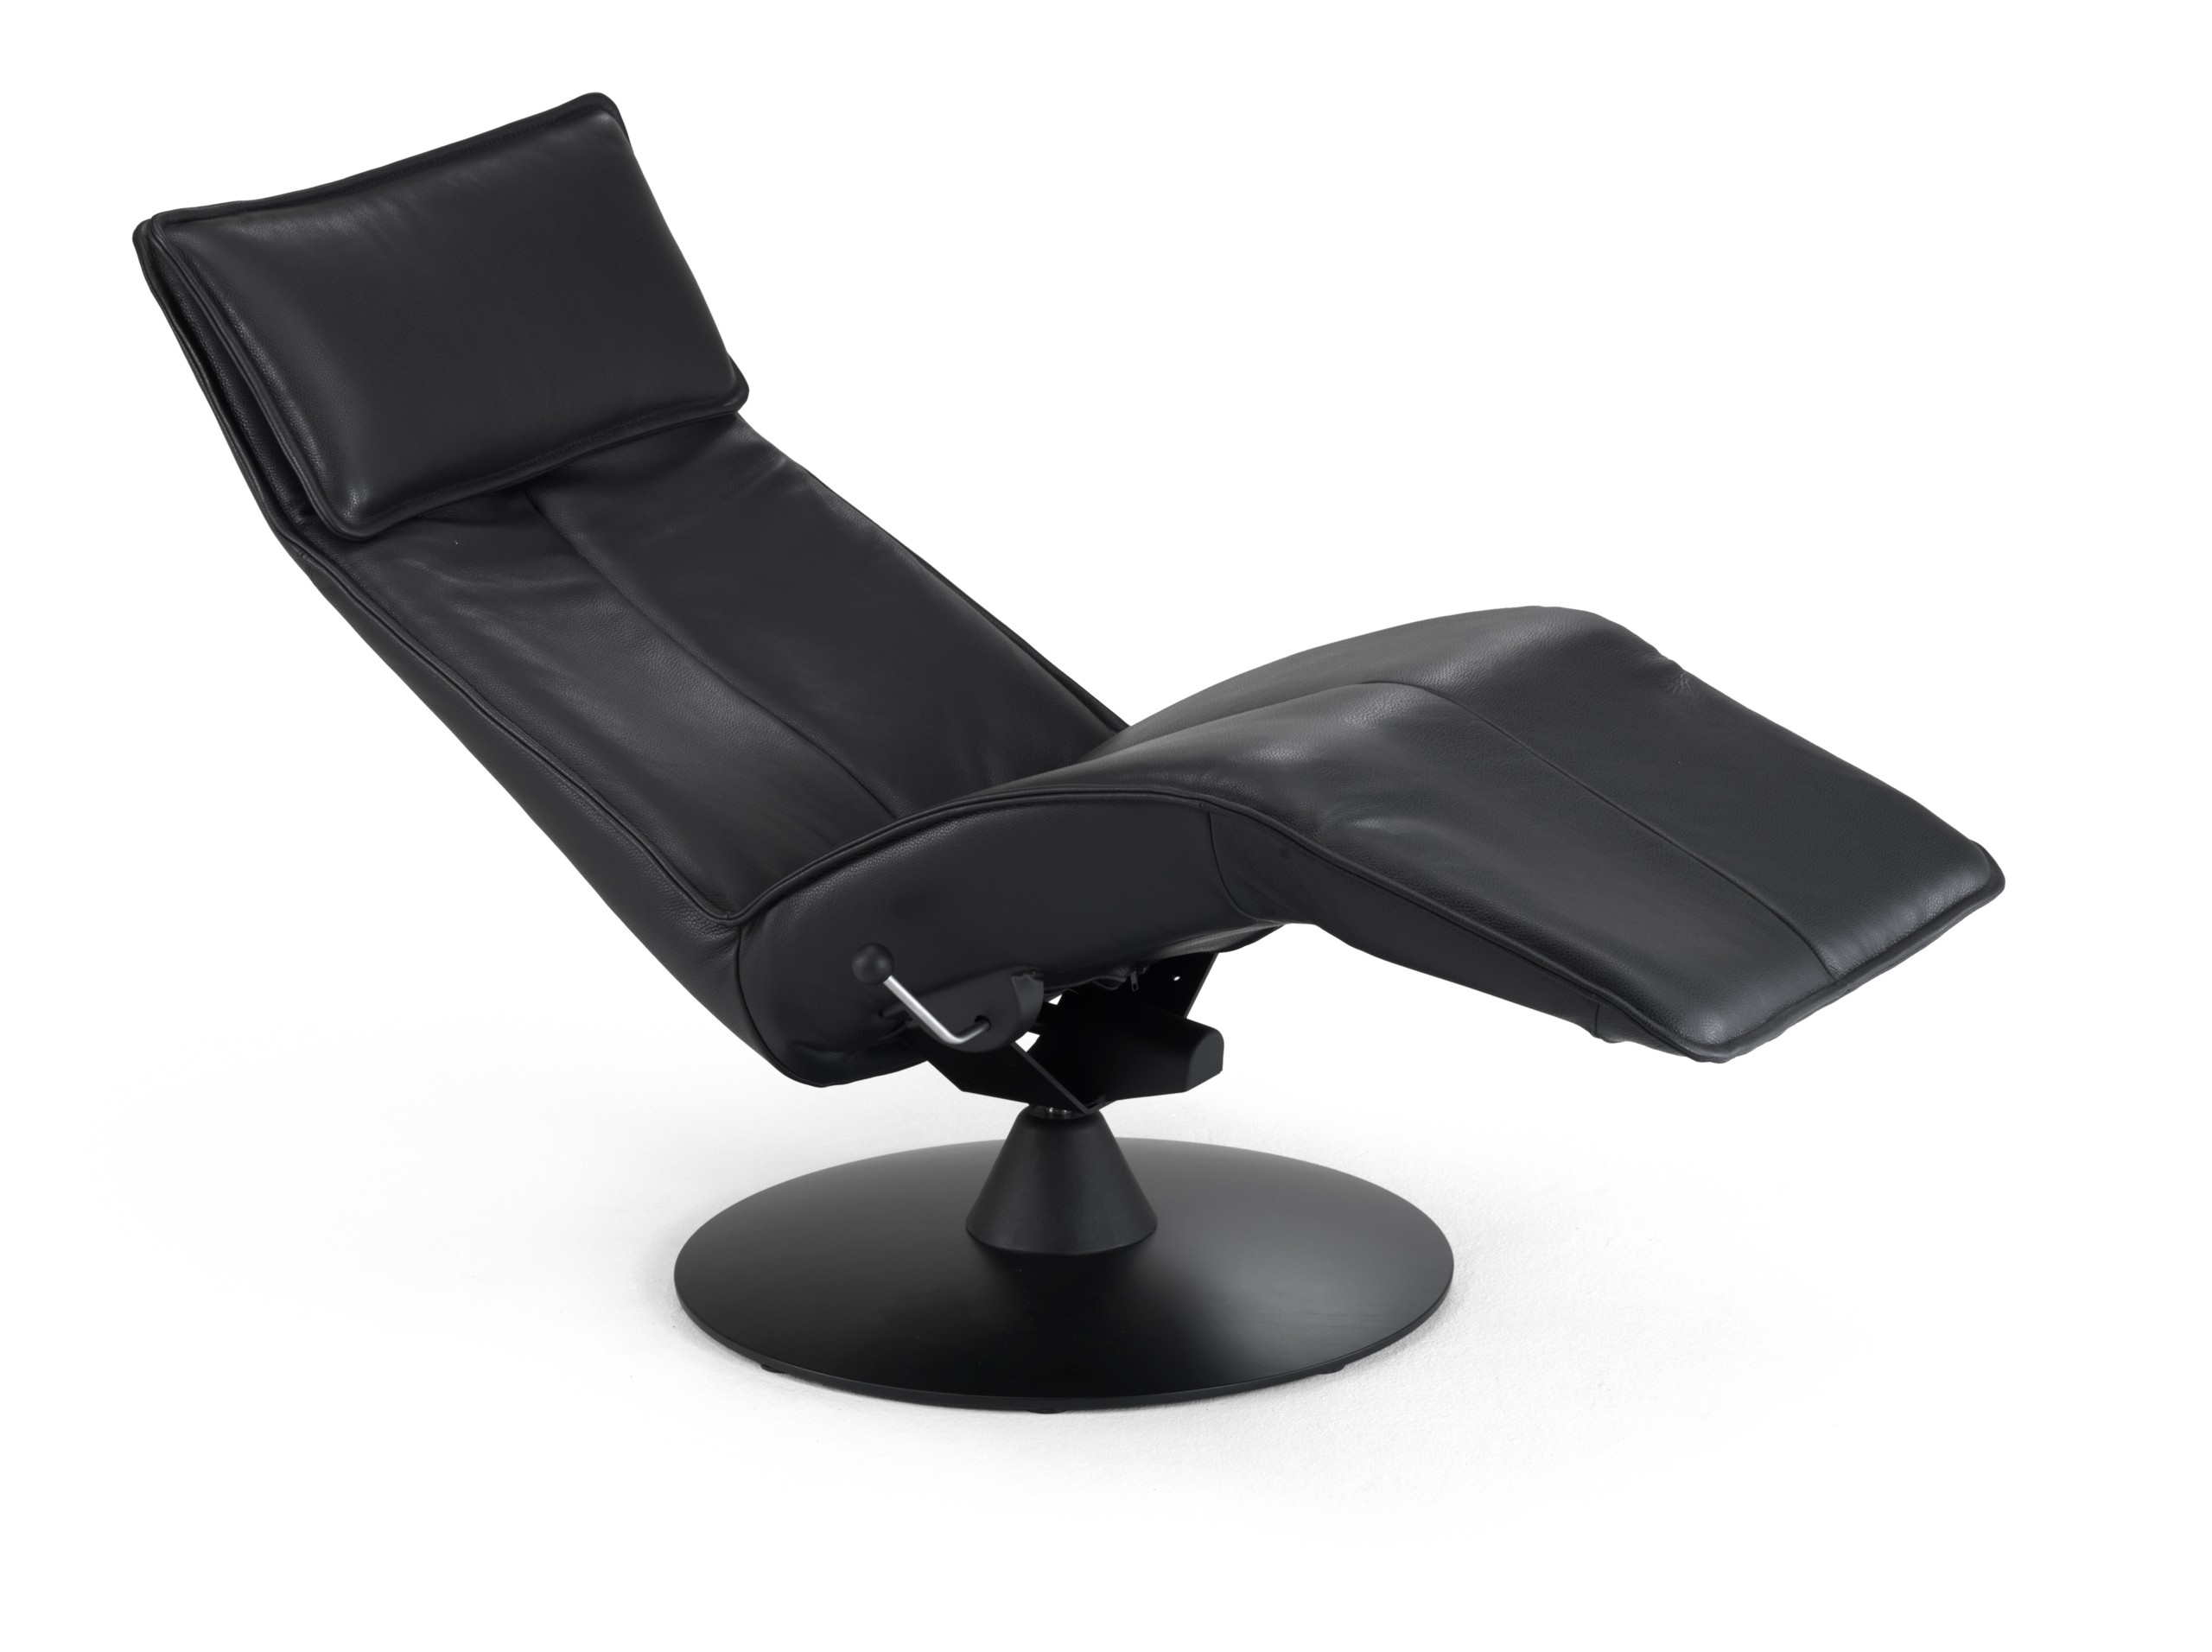 Fjords Contura 2000 Zero Gravity Recliner Chair in Premium Astro Line Black Leather by Hjellegjerde - Standard Ground Curbside Delivery